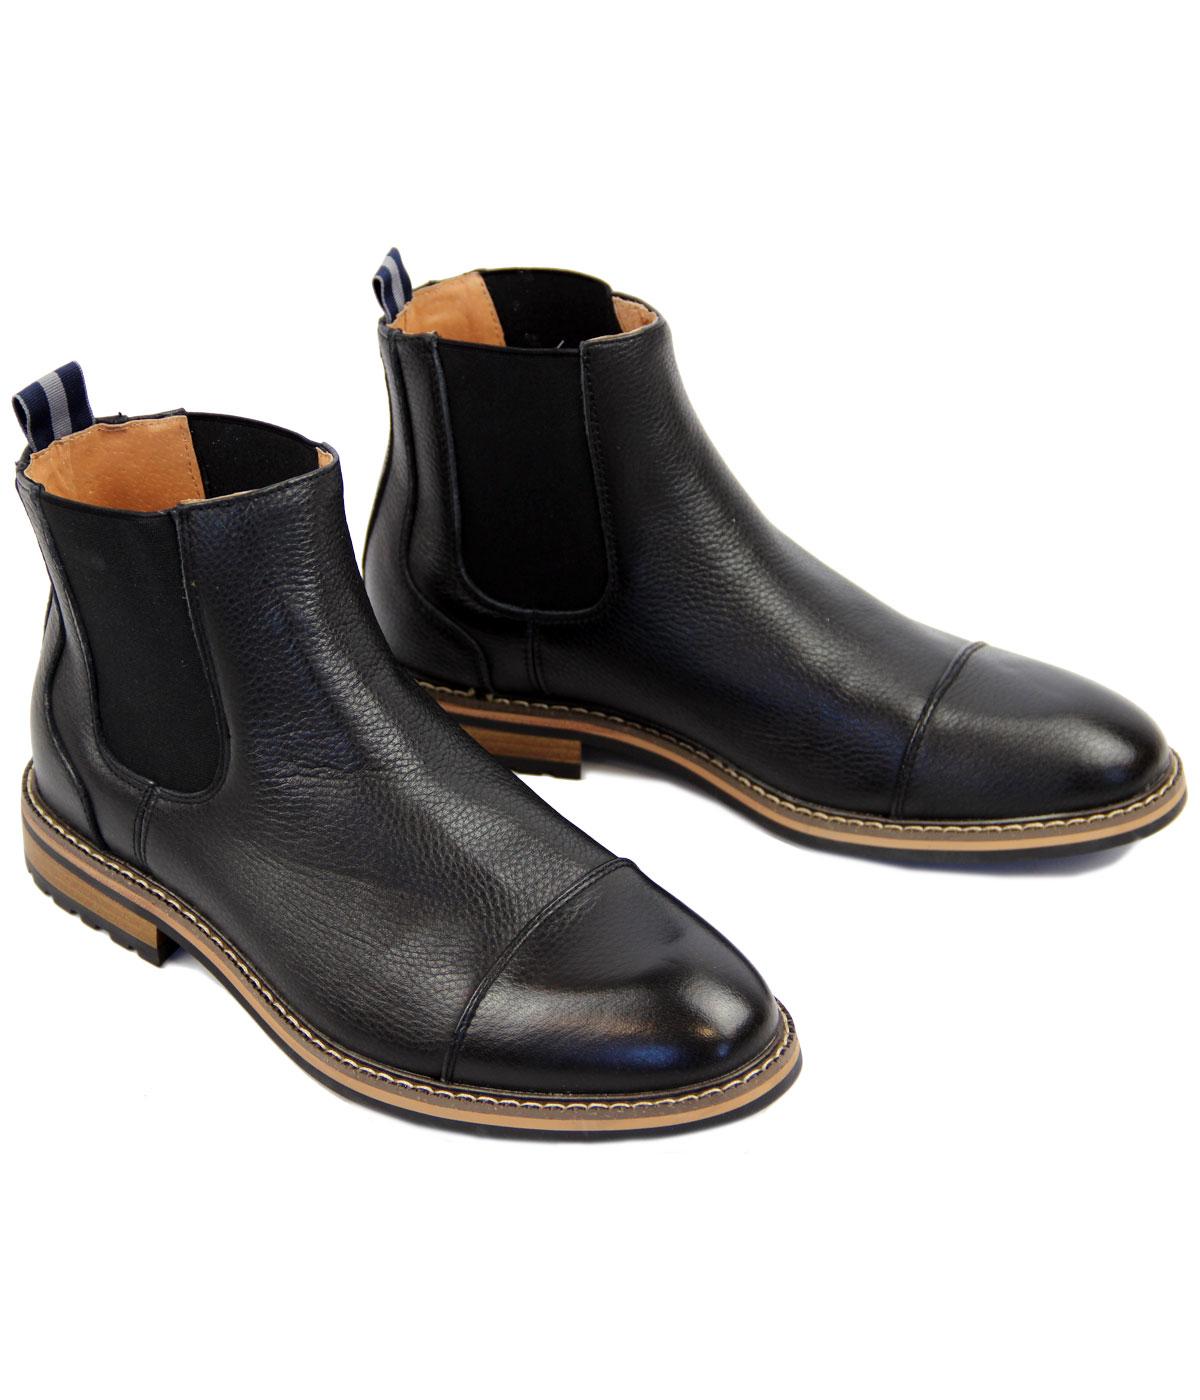 PETER WERTH Retro Mod Toe Leather Chelsea Boots